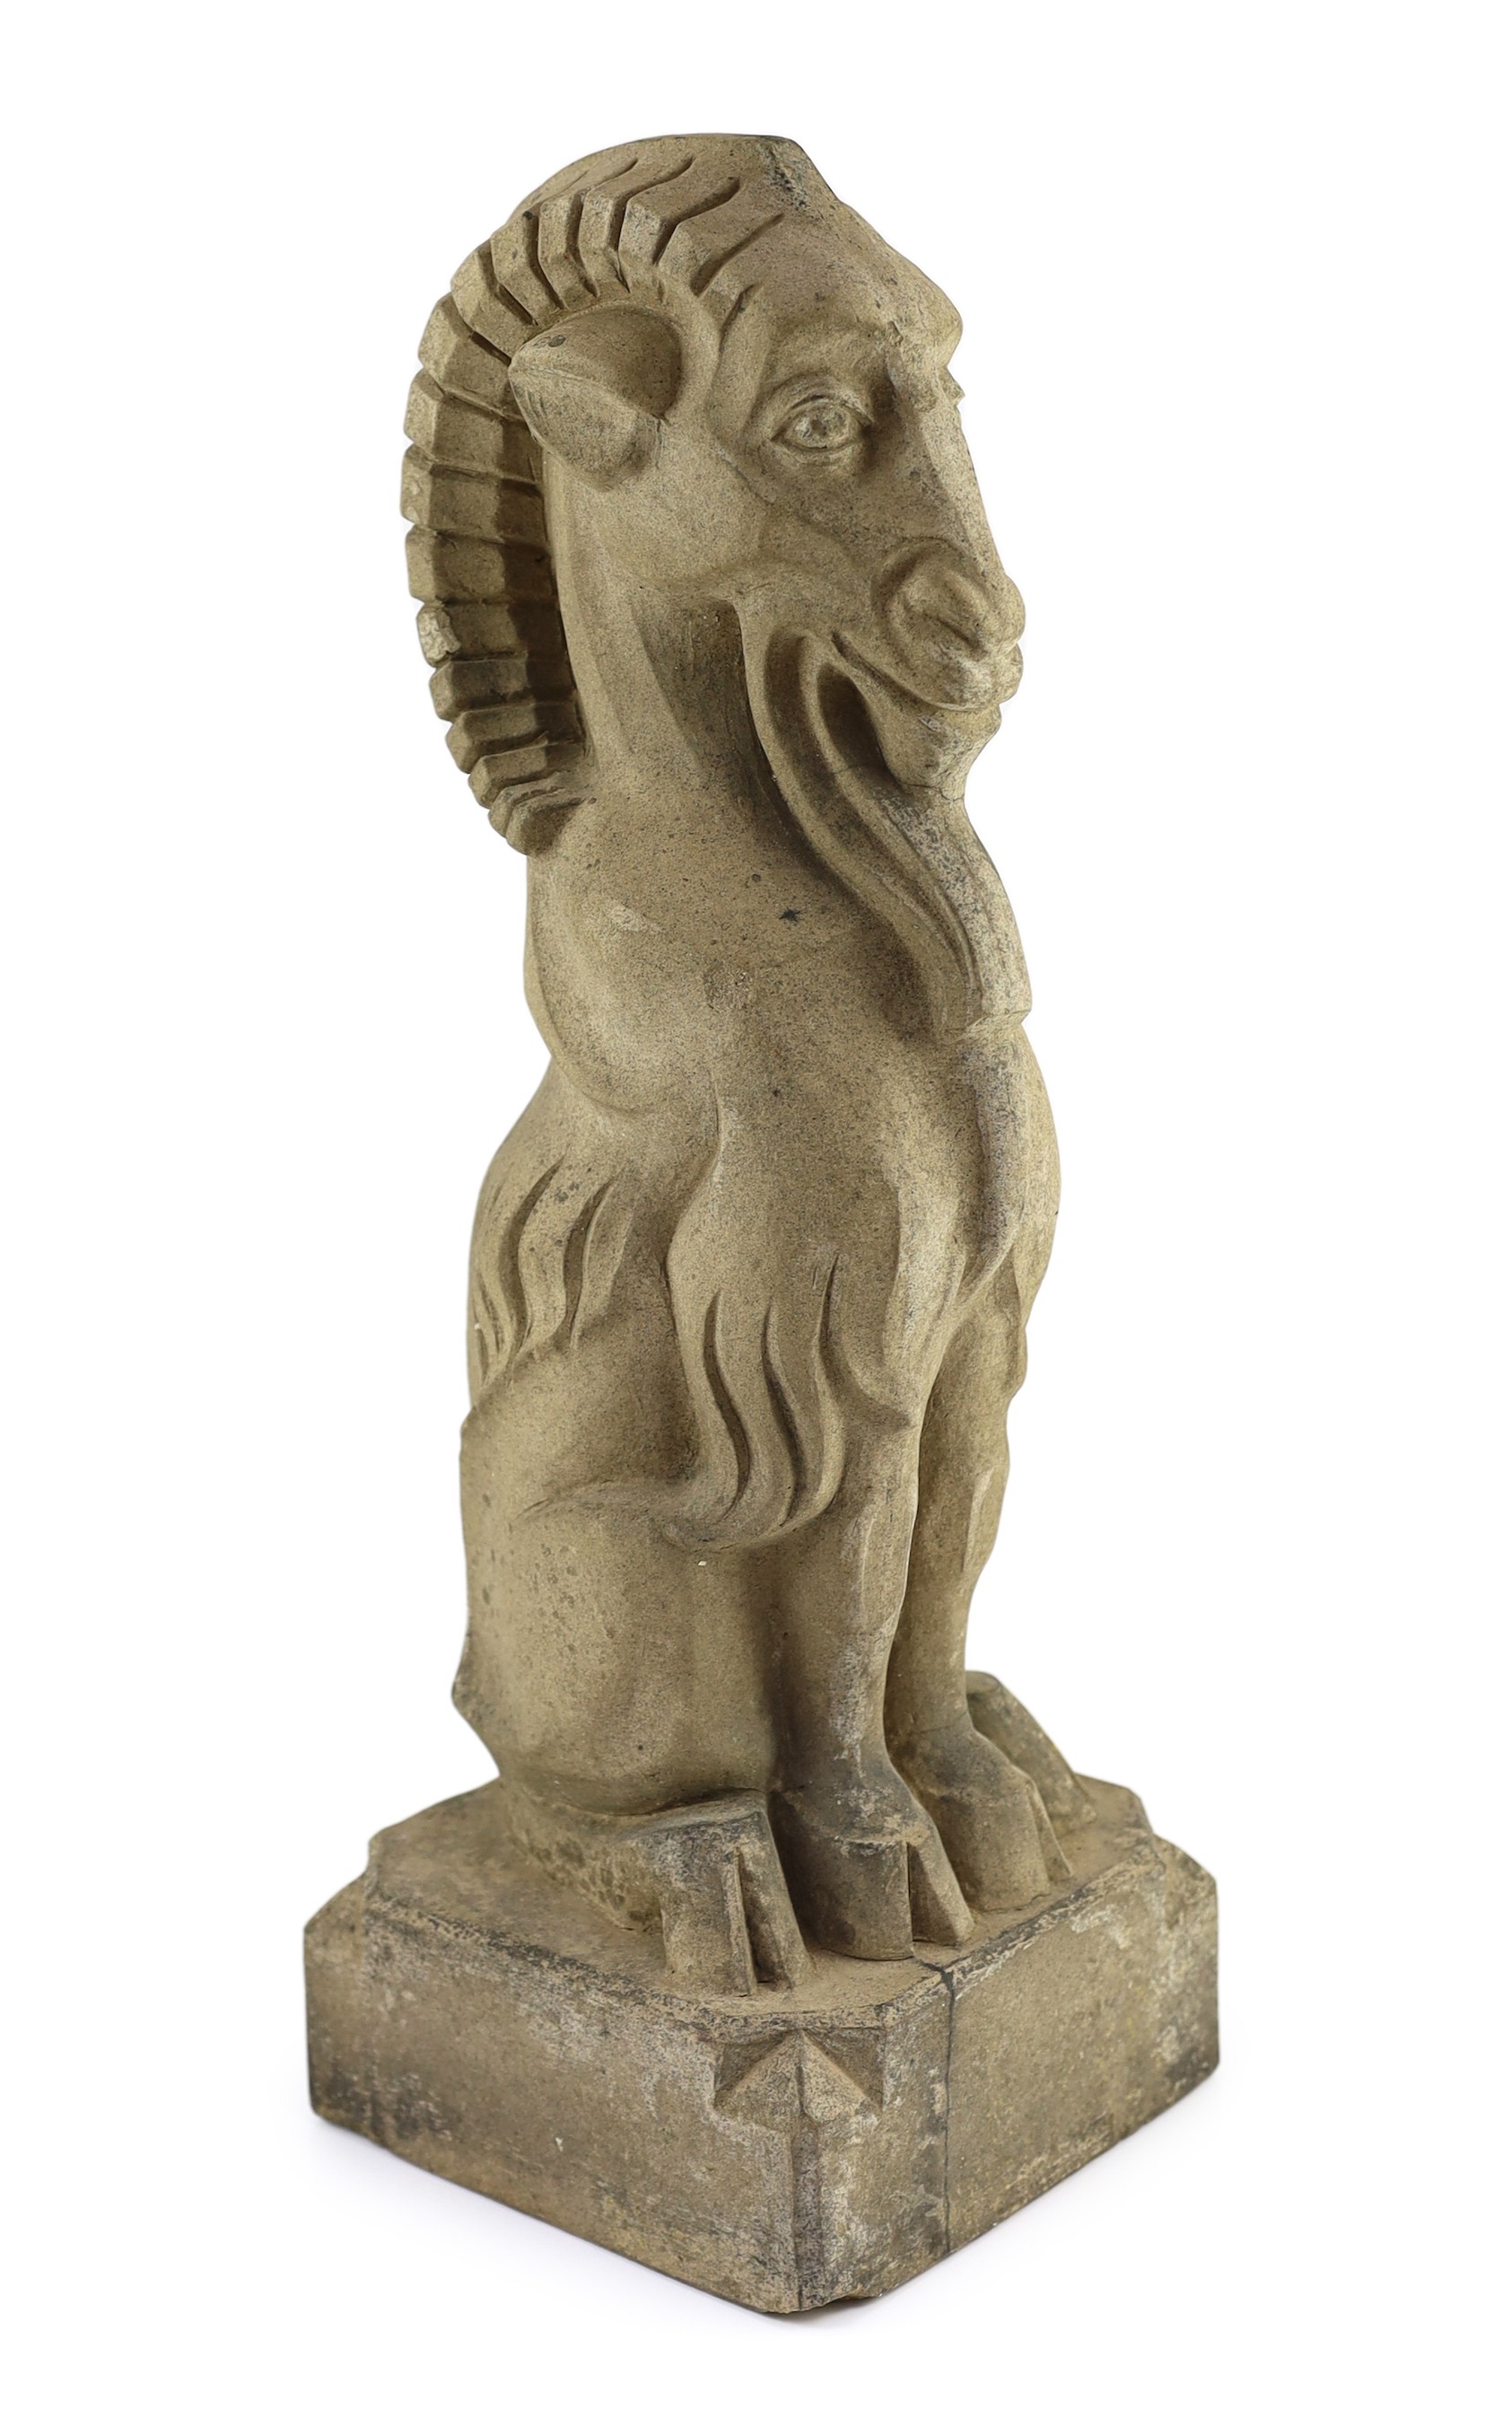 A Doulton Lambeth stoneware garden figure of a seated goat, designed by Francis Pope, early 20th